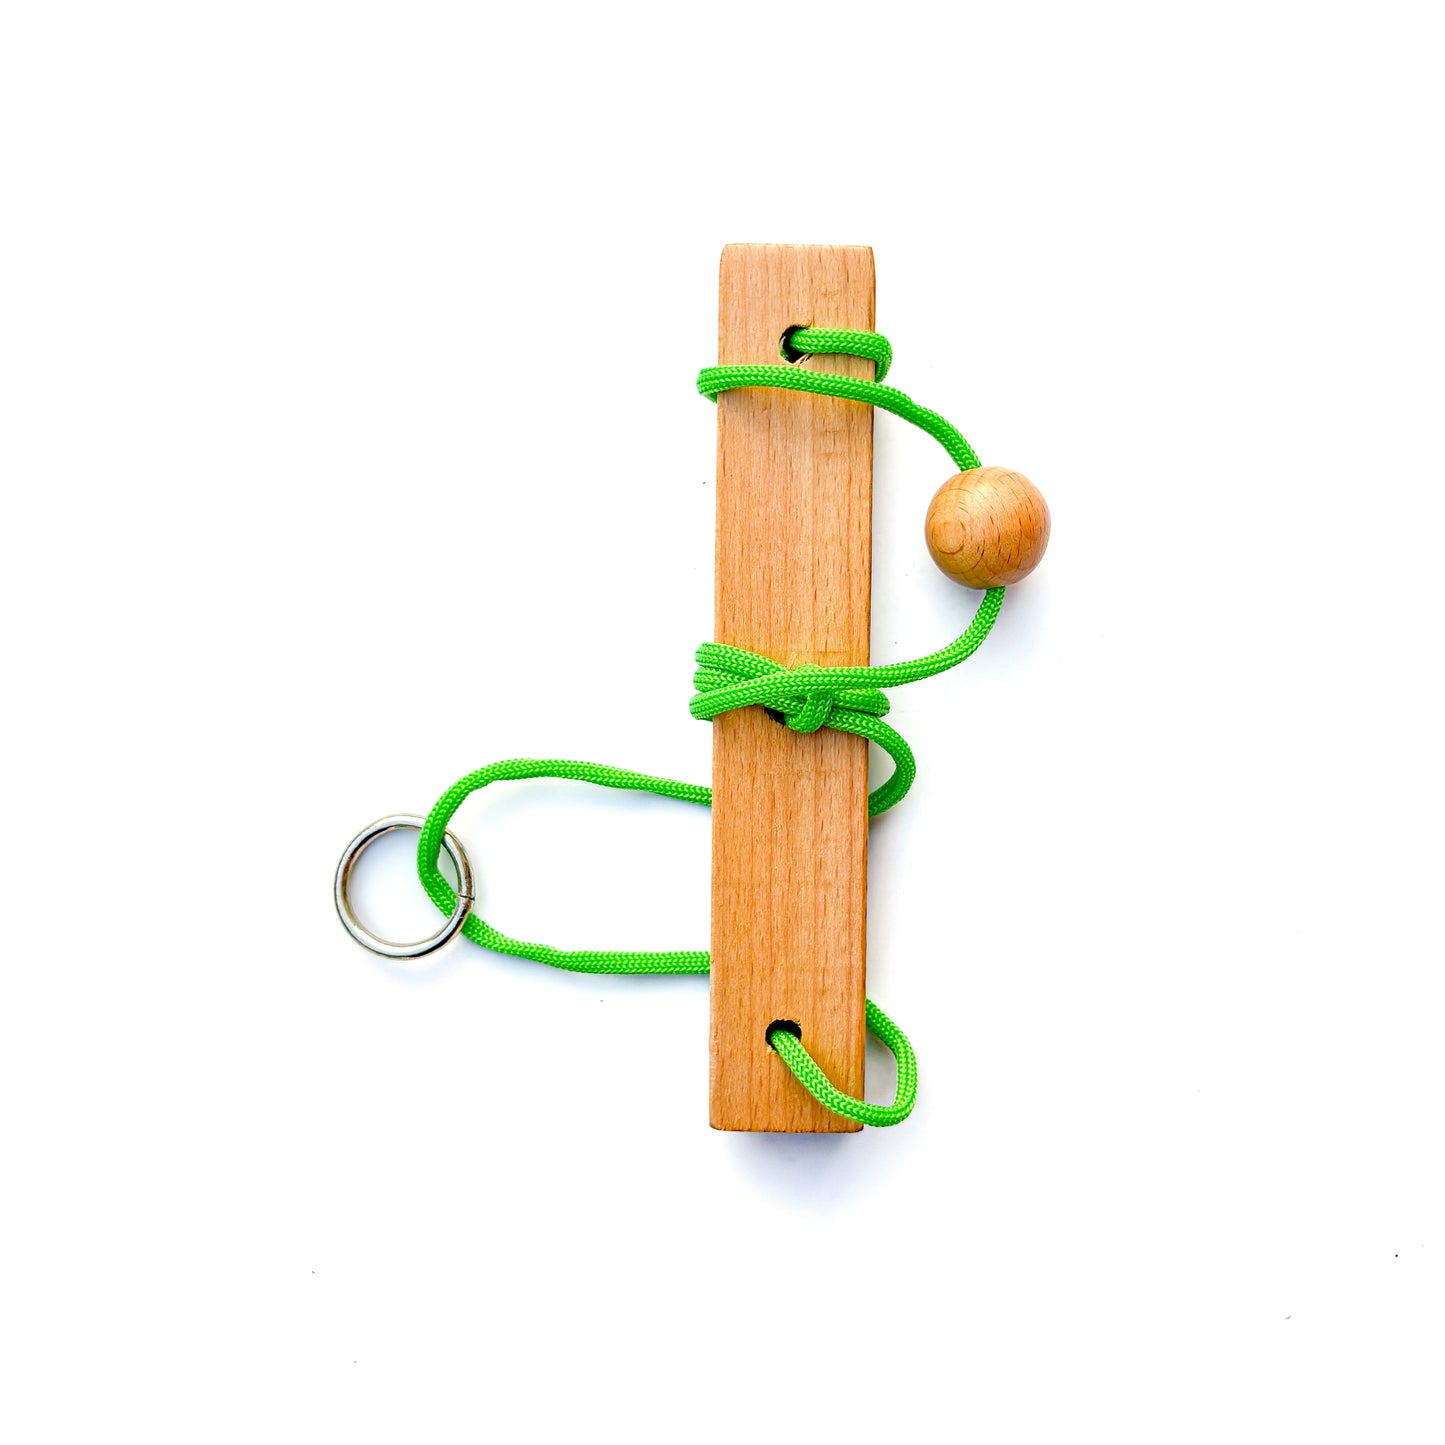 String Puzzle with green rope having a ring and a ball to disentangle.